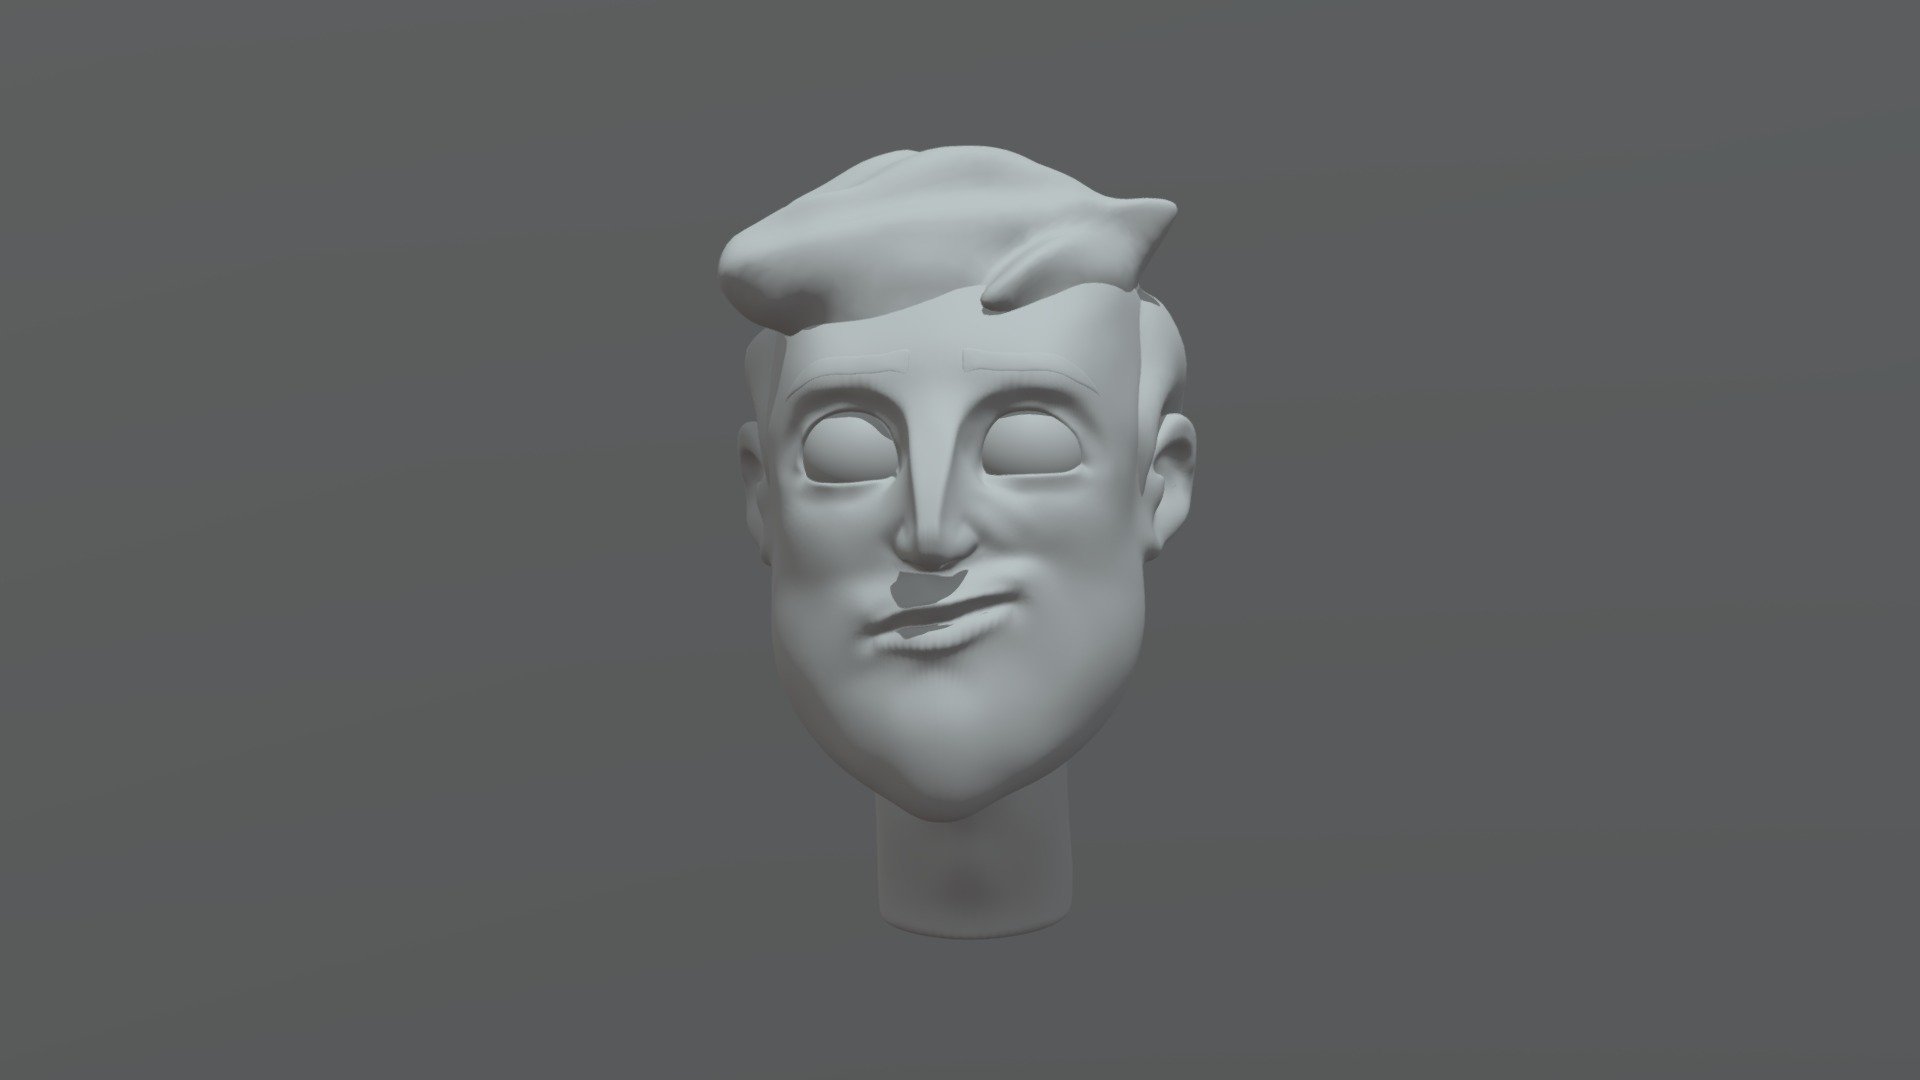 A face Cartoon Character made by Zbrush, it can be an asset or a face of charater in games, full of details, smooth and nice
3d obj.

check my work in Instagram :  https://www.instagram.com/333d.amin/ - Cartoon Character - 3D model by 3D.Amine (@3D-Amine) 3d model